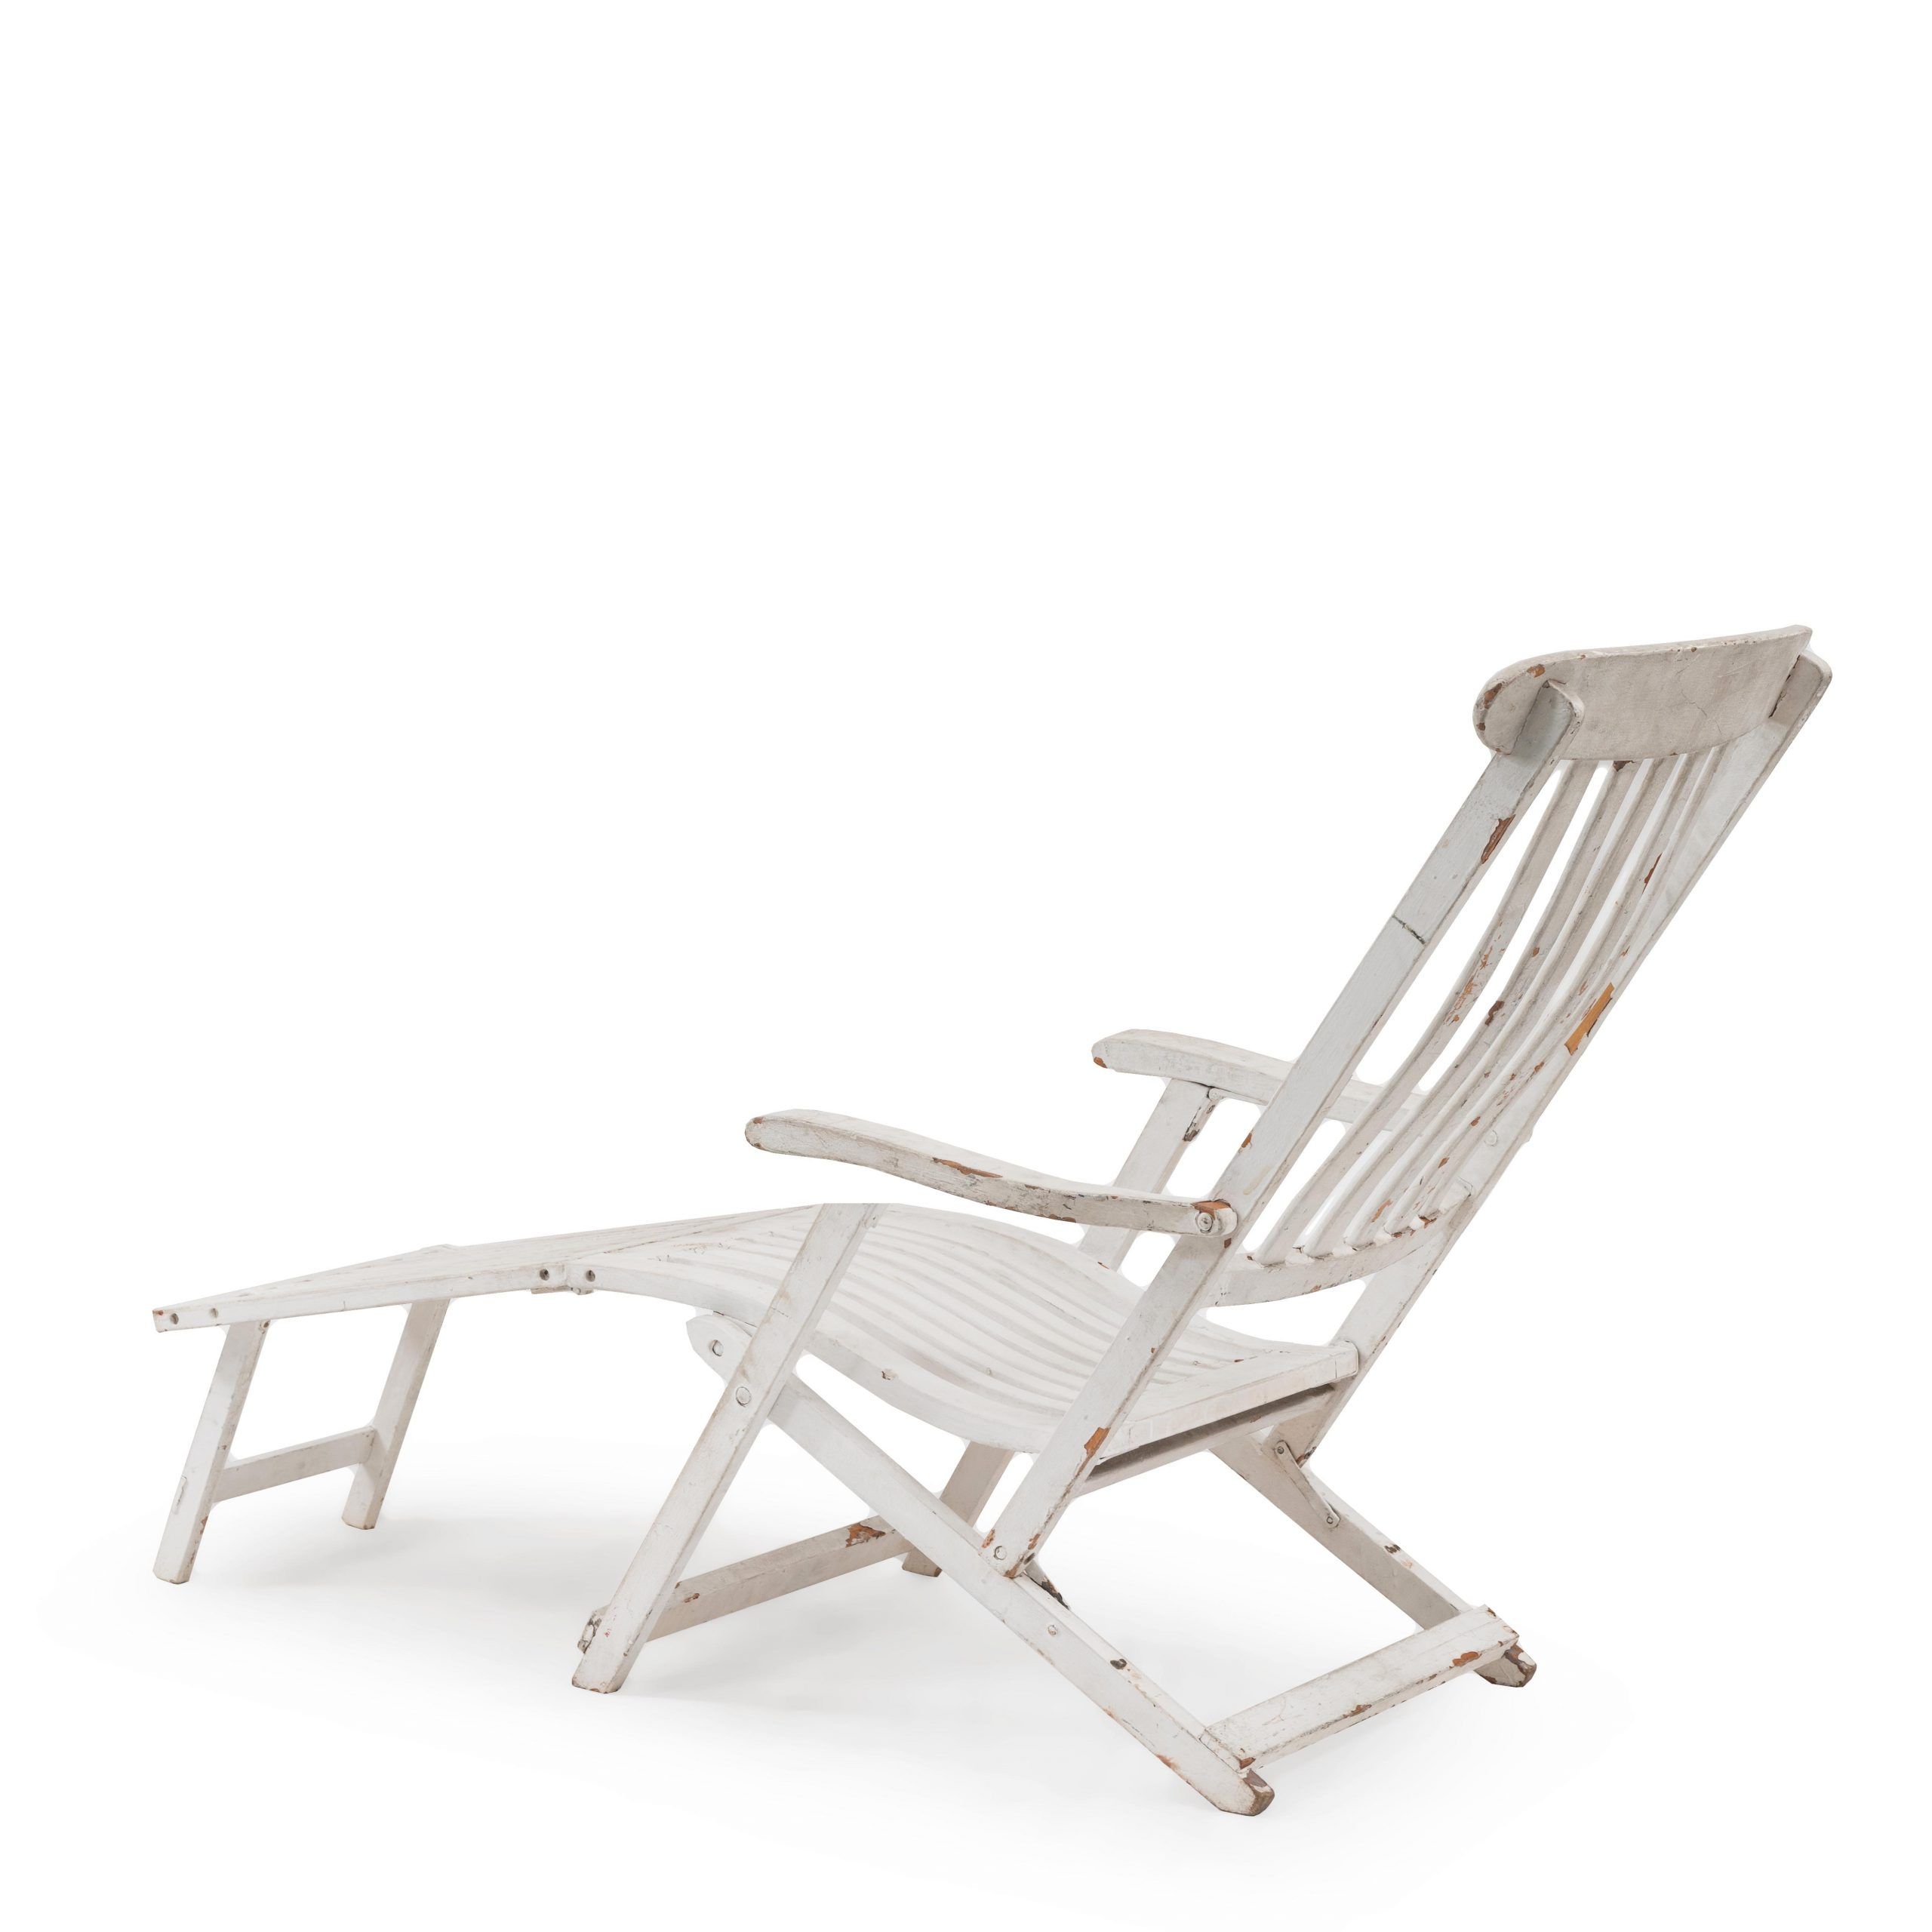 Fabric Outdoor Middle Chair Sets For Latest Outdoor White Folding Deck Chairs (View 13 of 15)